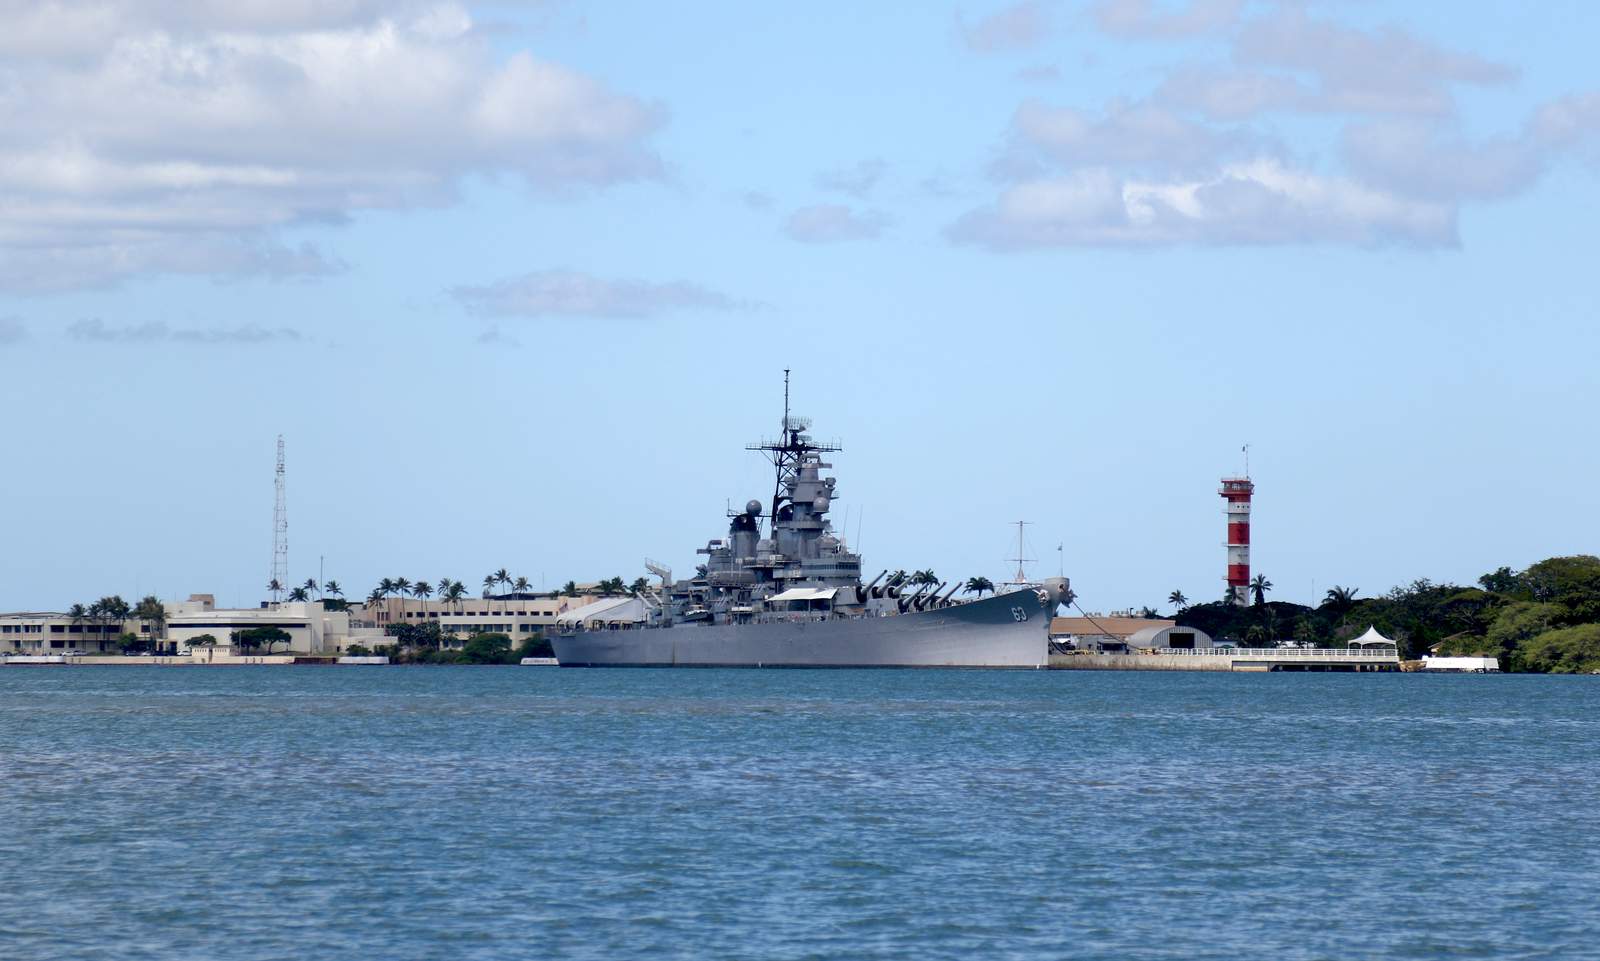 WATCH: 75th commemoration of the end of WWII to be held in Pearl Harbor